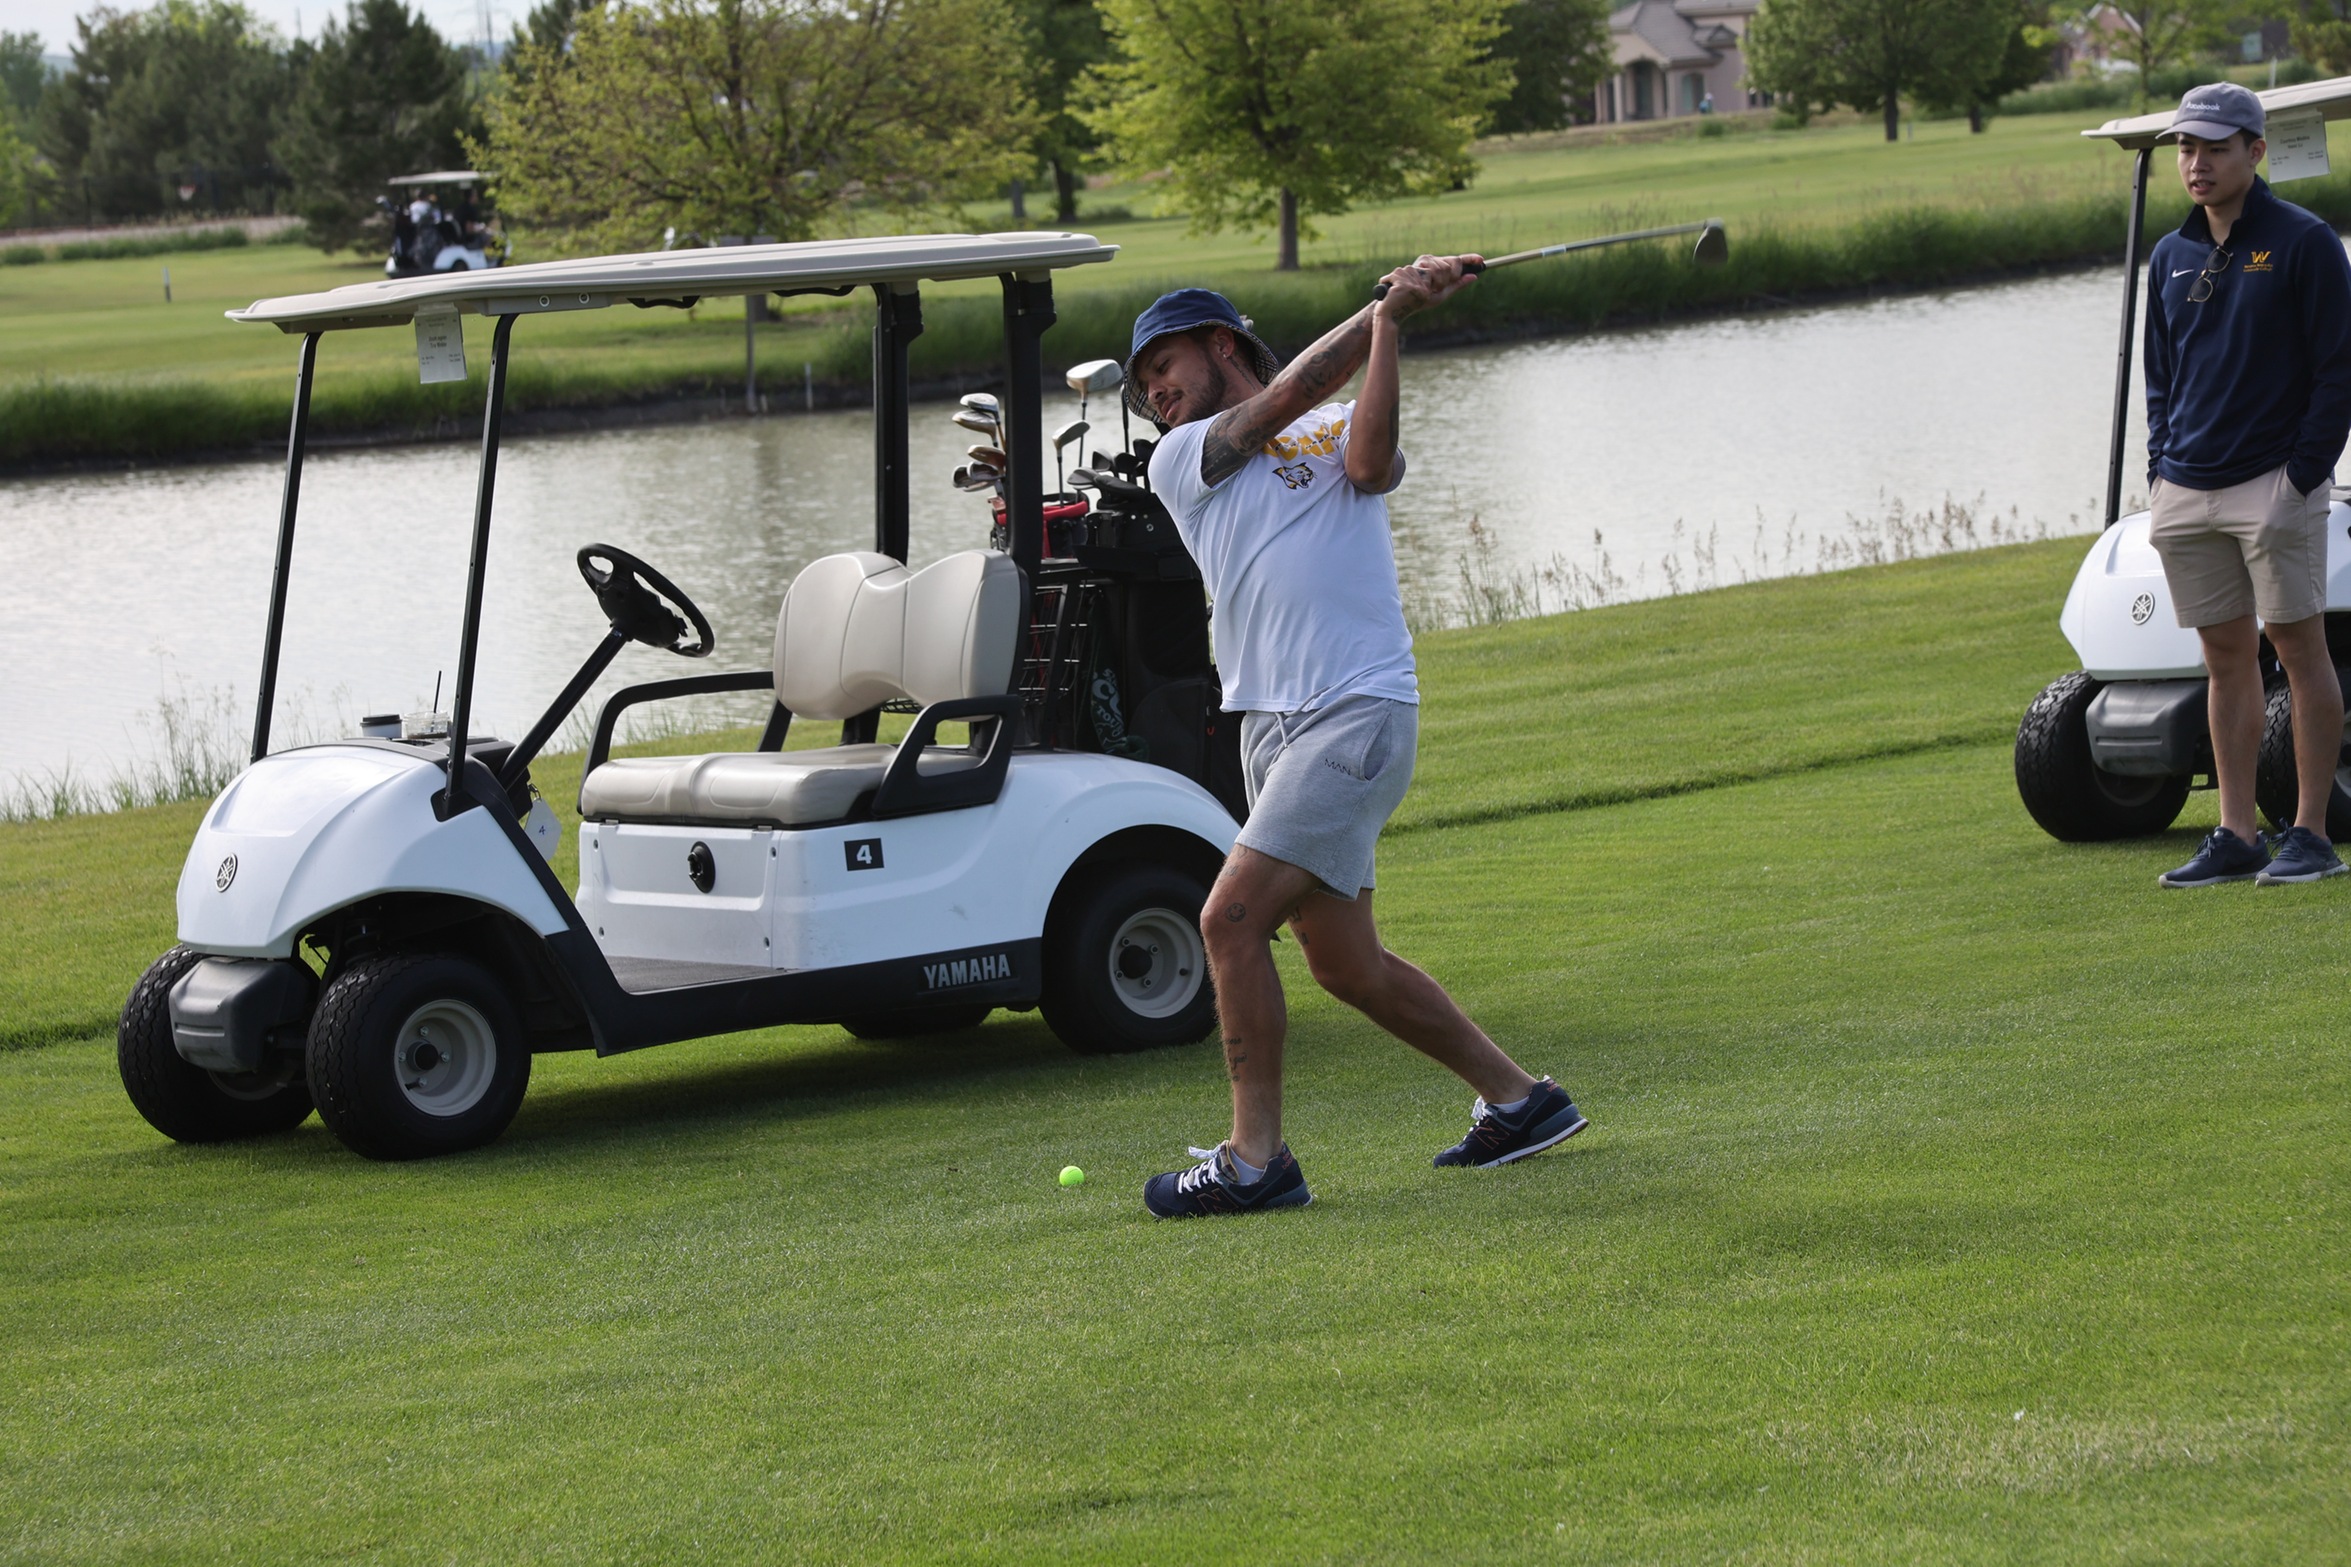 Action from last year's golf classic.